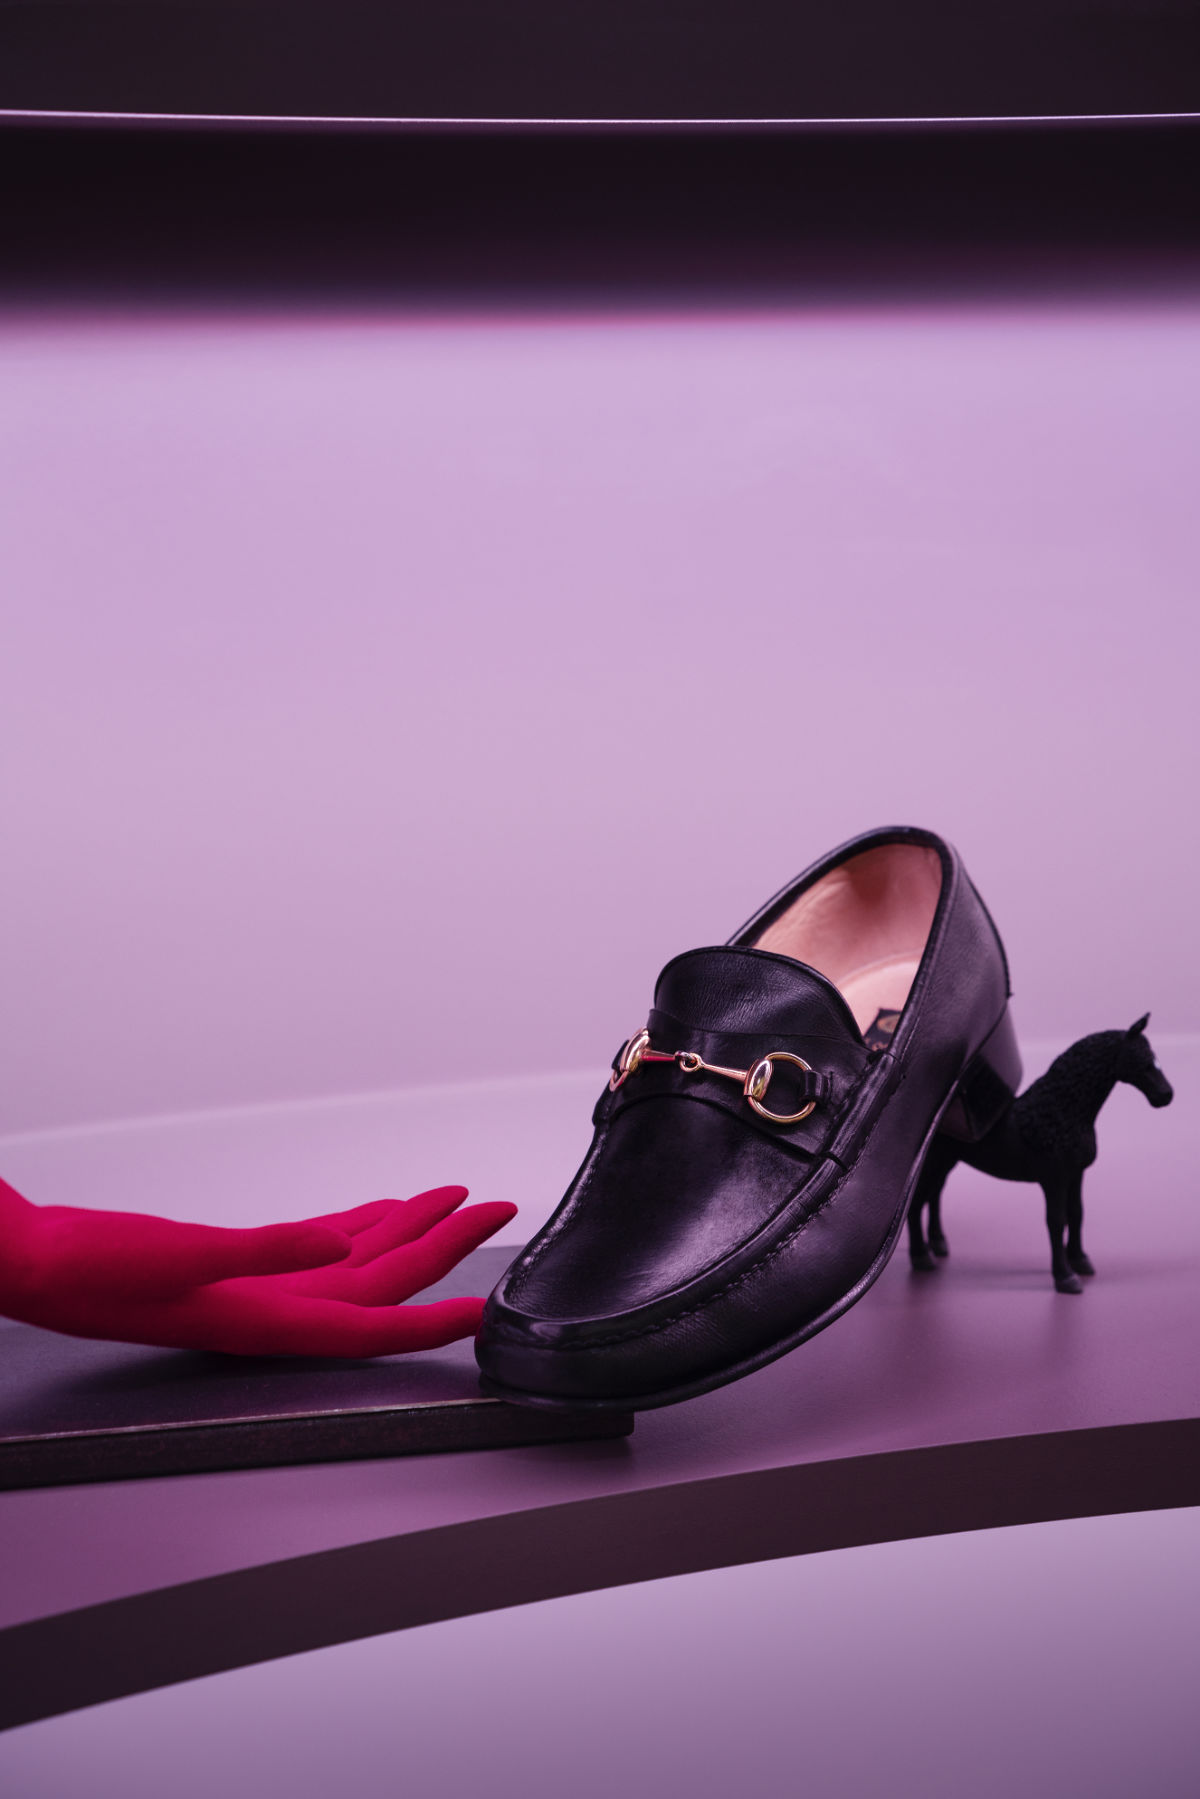 Gucci's horsebit loafer is still a coveted status symbol 70 years on